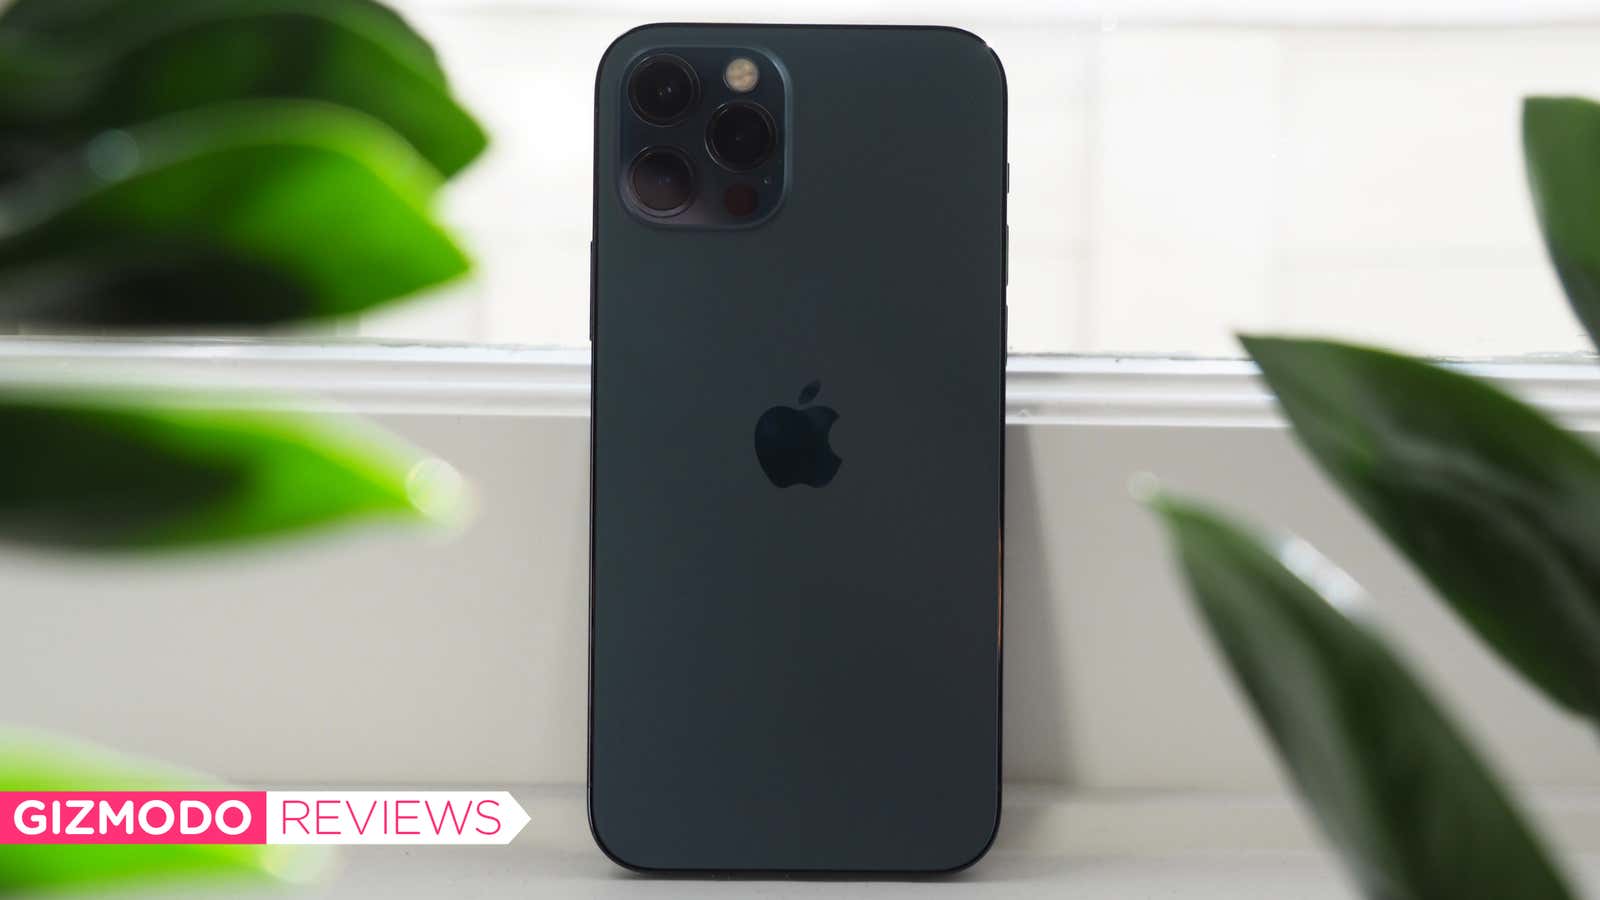 Apple iPhone 11 Pro Review: It's All About the Camera